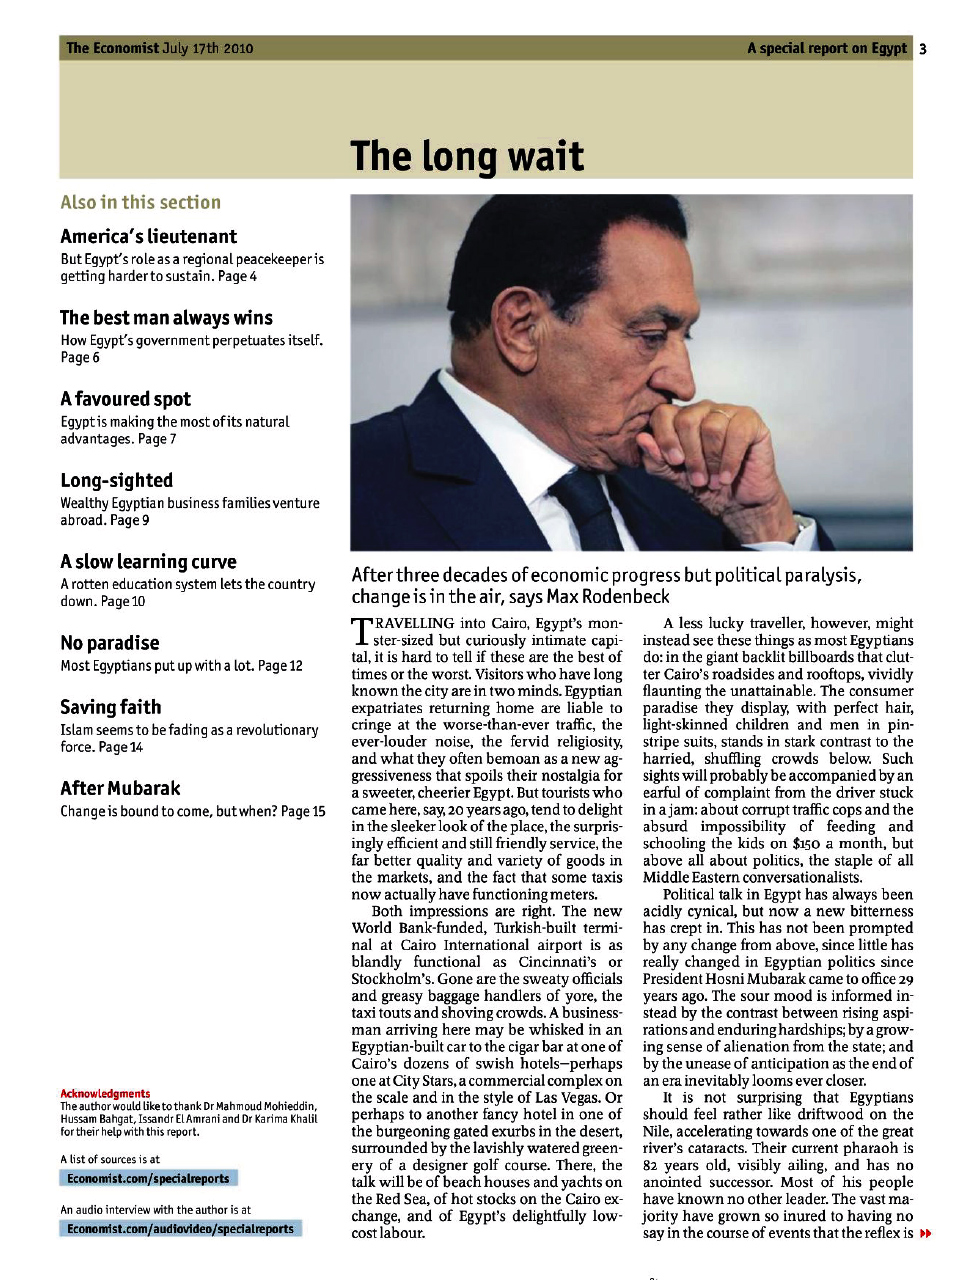 The Economist's 'A Special Report on Egypt ,' July 17-23, 2010 issue.